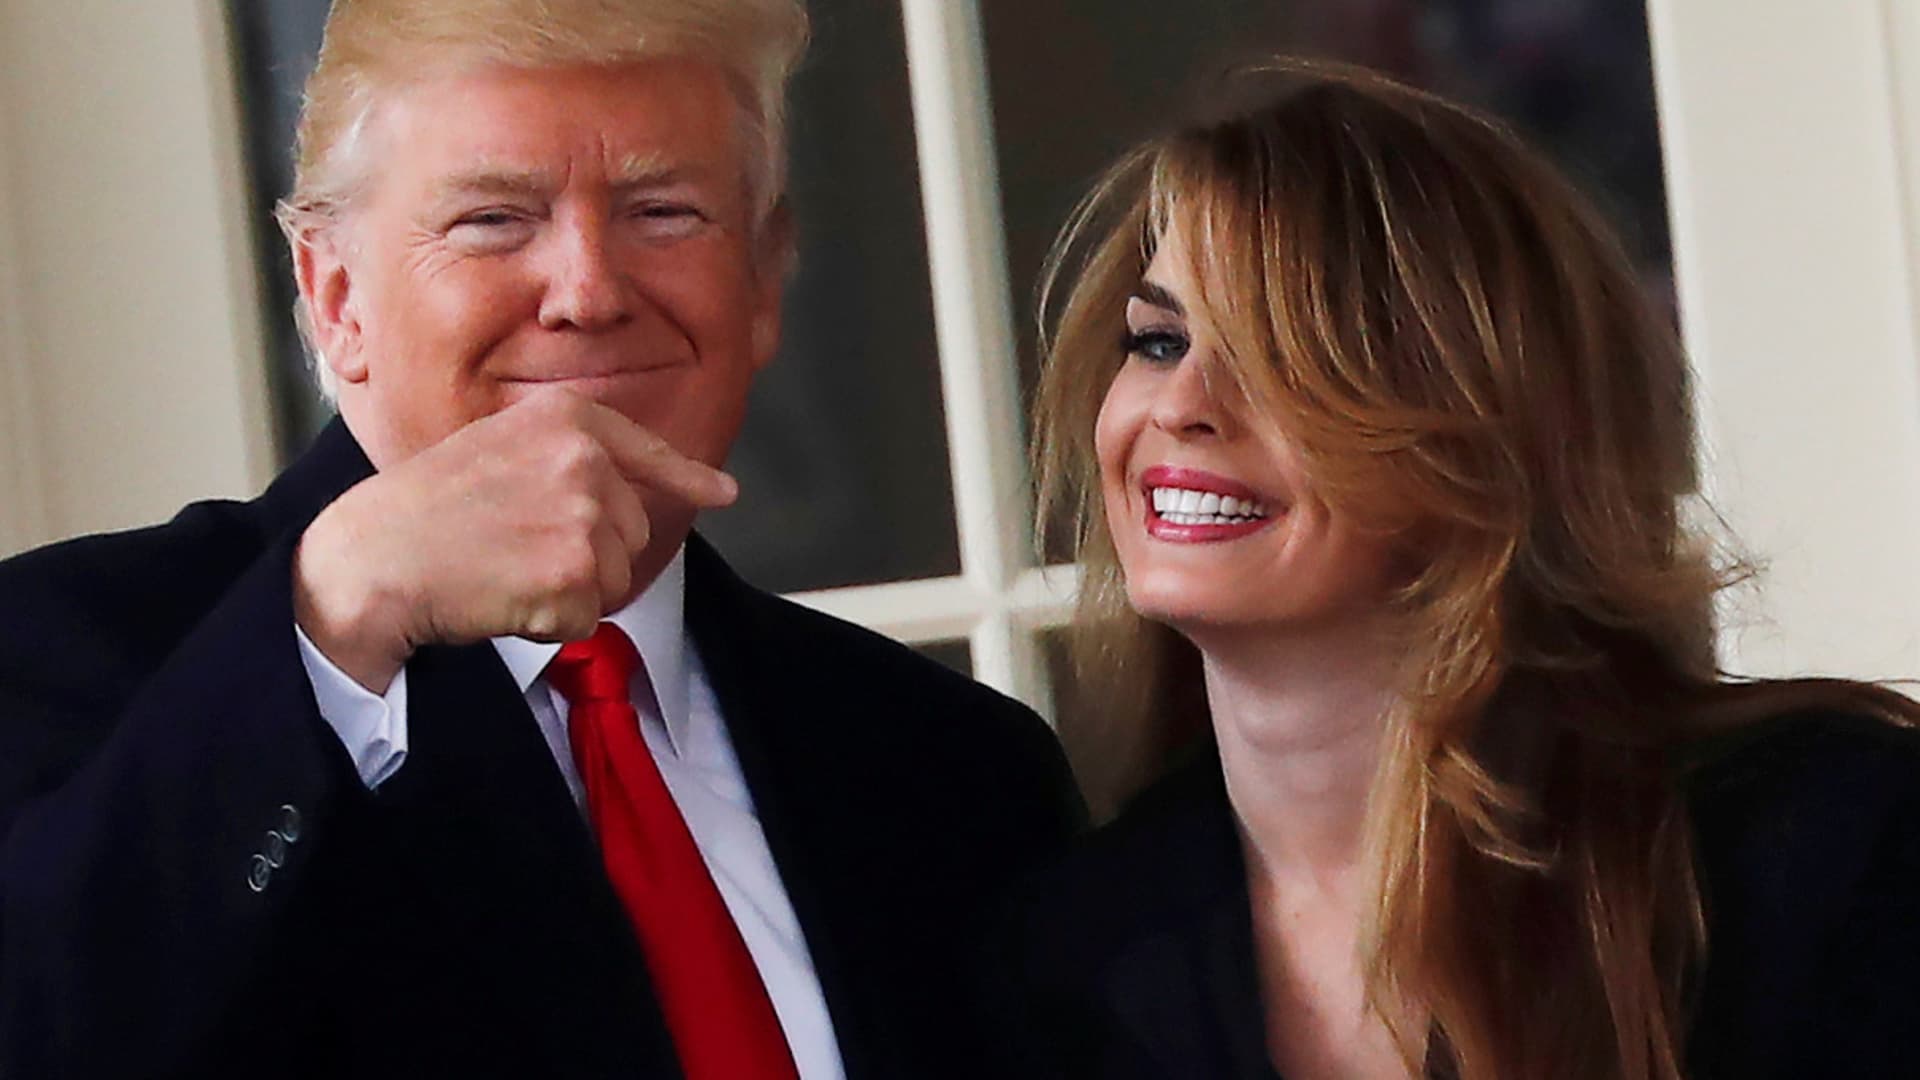 Trump trial: Former top aide Hope Hicks testifies about ‘Access Hollywood’ scandal